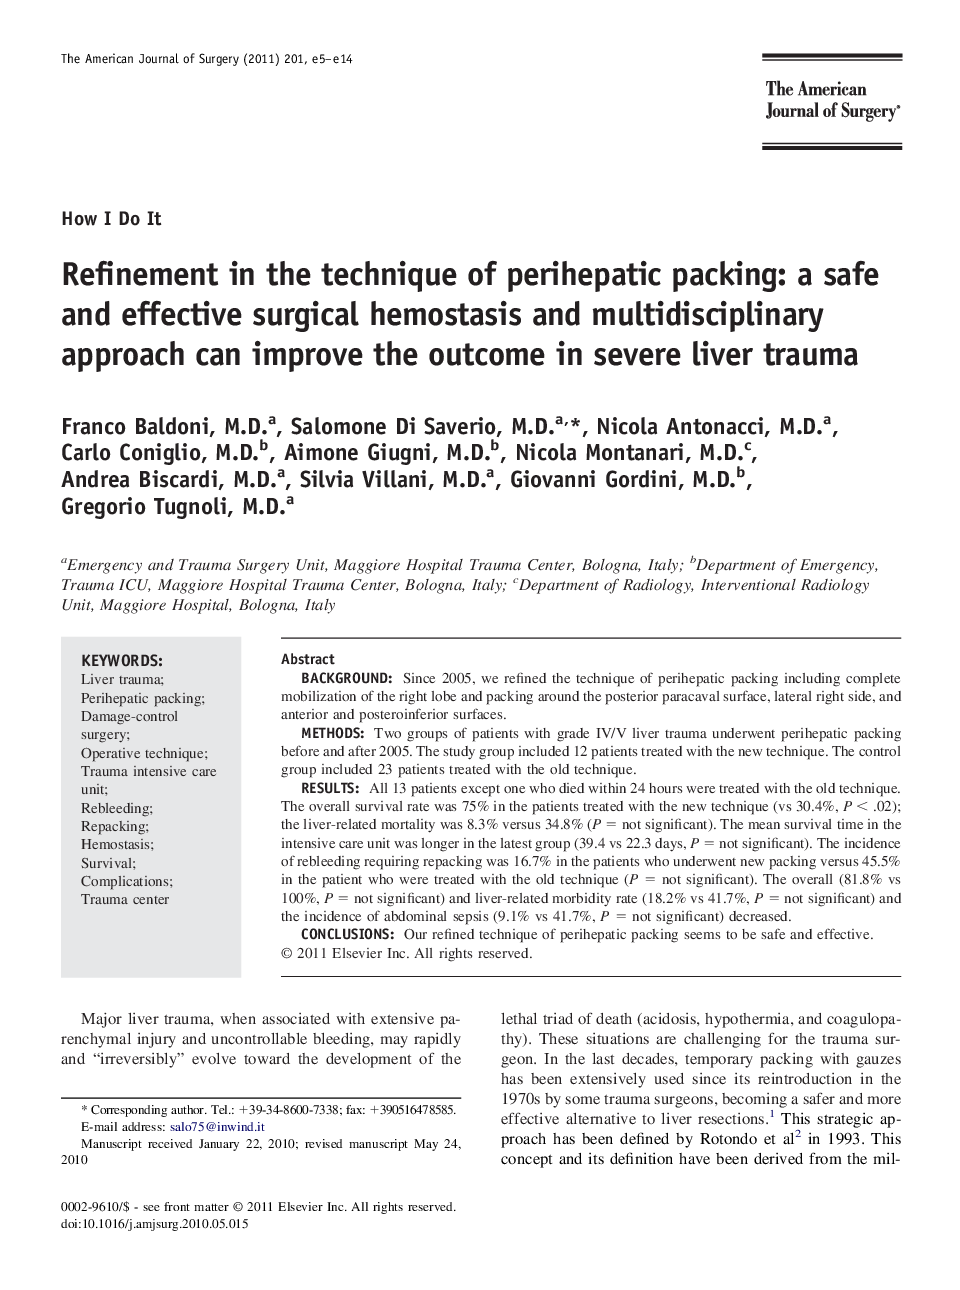 Refinement in the technique of perihepatic packing: a safe and effective surgical hemostasis and multidisciplinary approach can improve the outcome in severe liver trauma